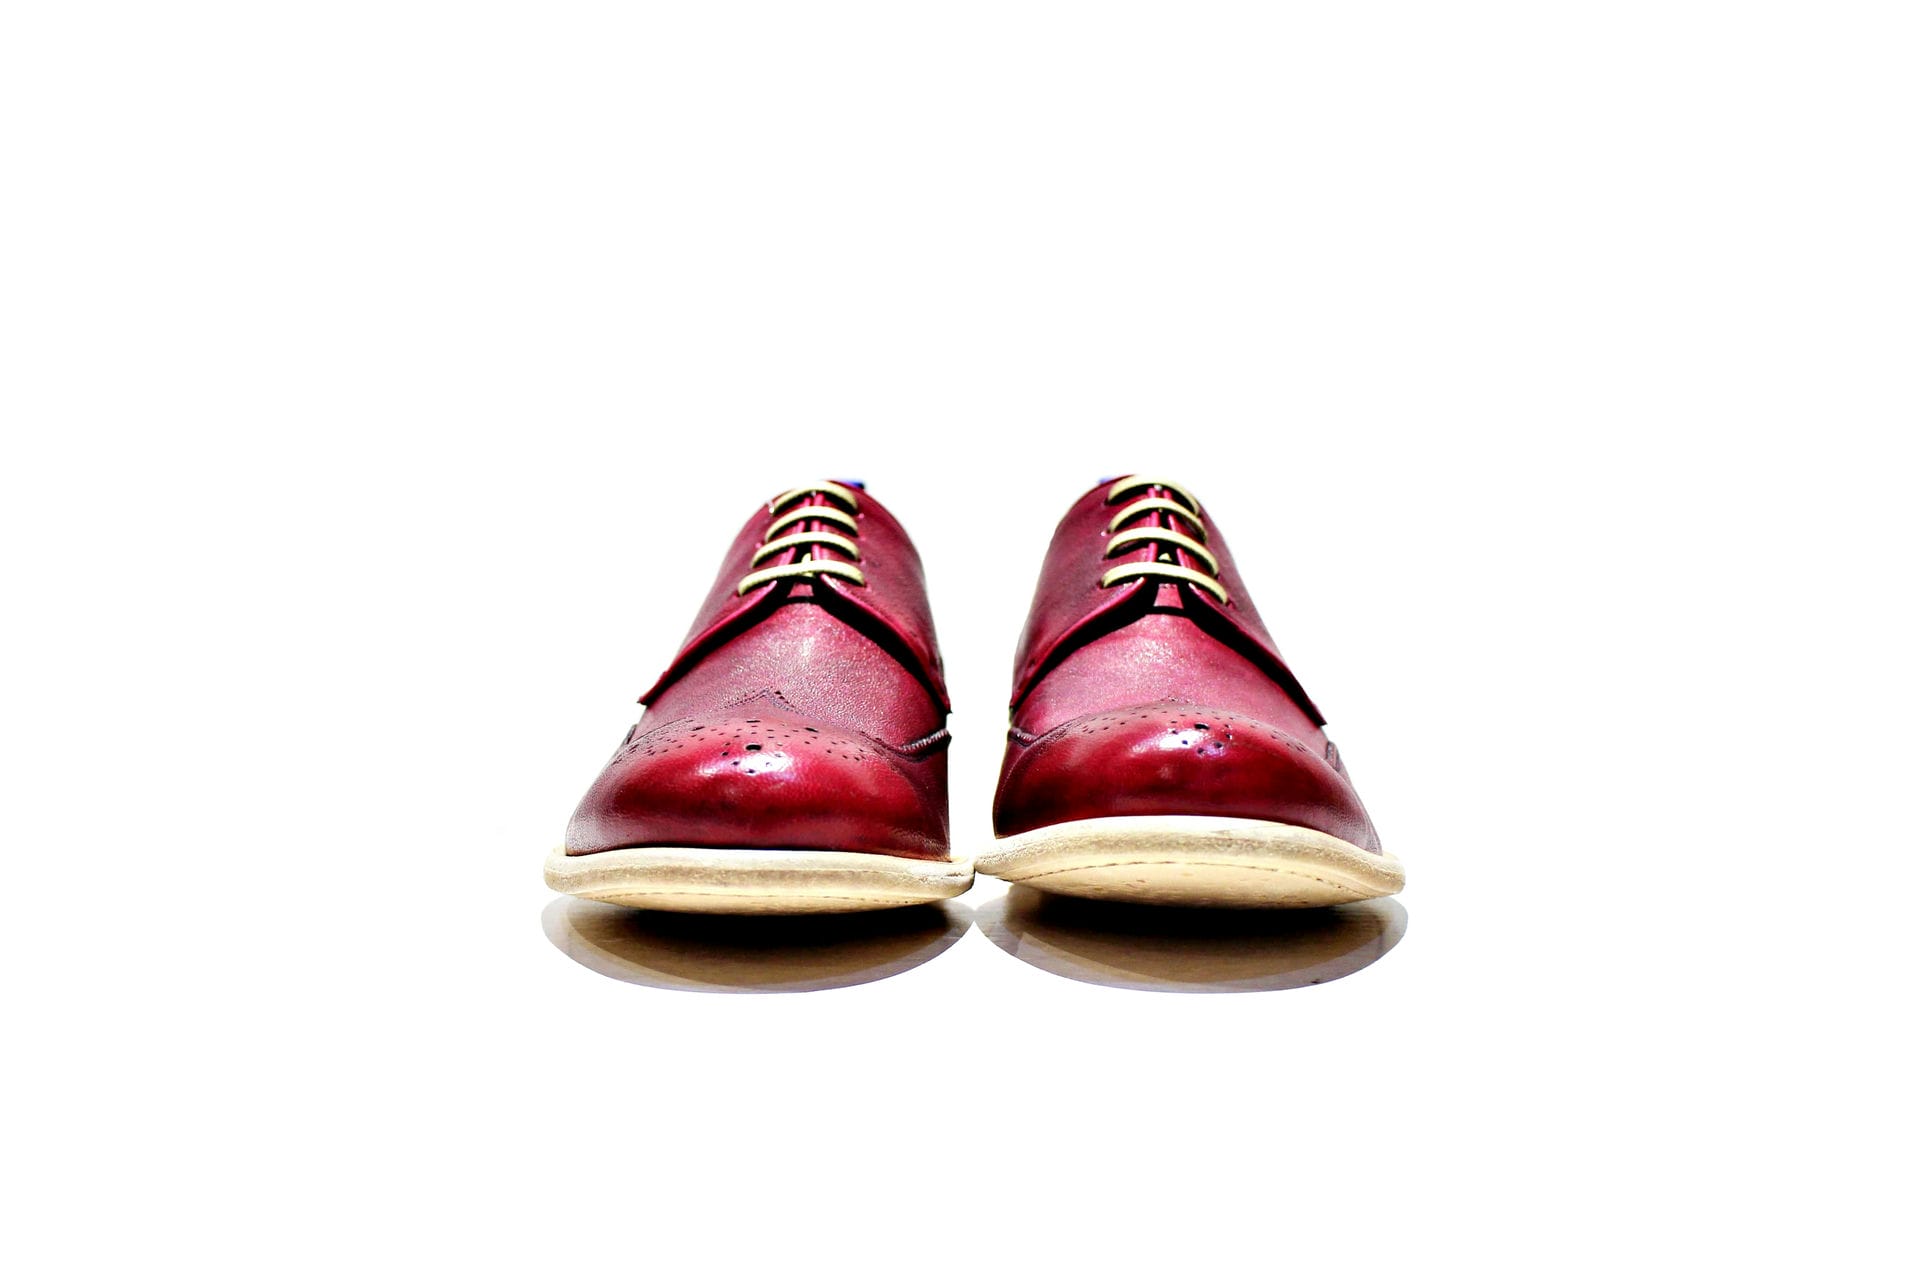 Shoe all composed of leather, with an exclusive look, model Incon. Handmade in Portugal. . “Walk with Pintta”